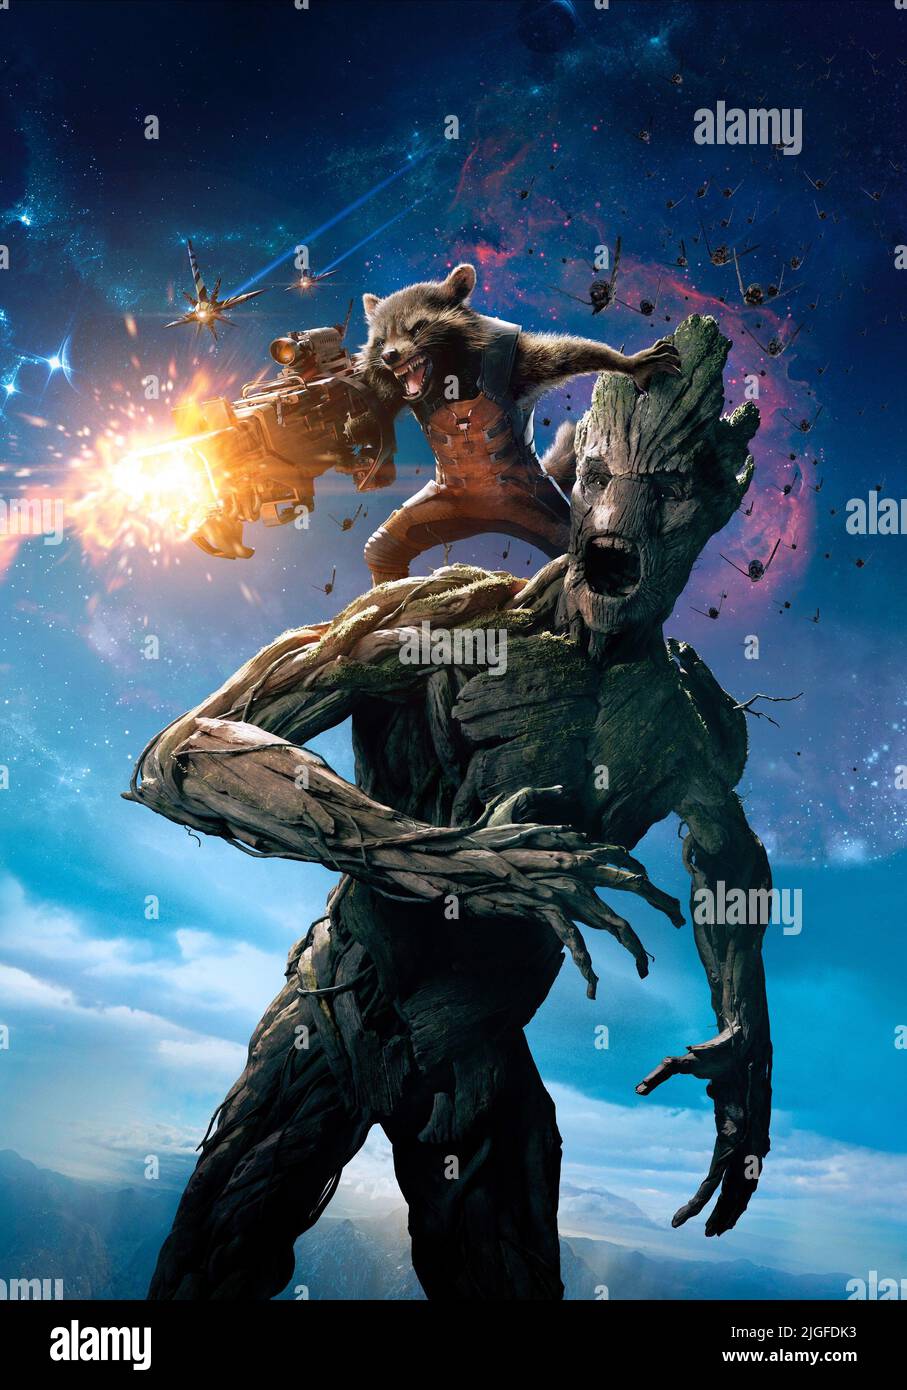 ROCKET,GROOT, GUARDIANS OF THE GALAXY, 2014 Stock Photo